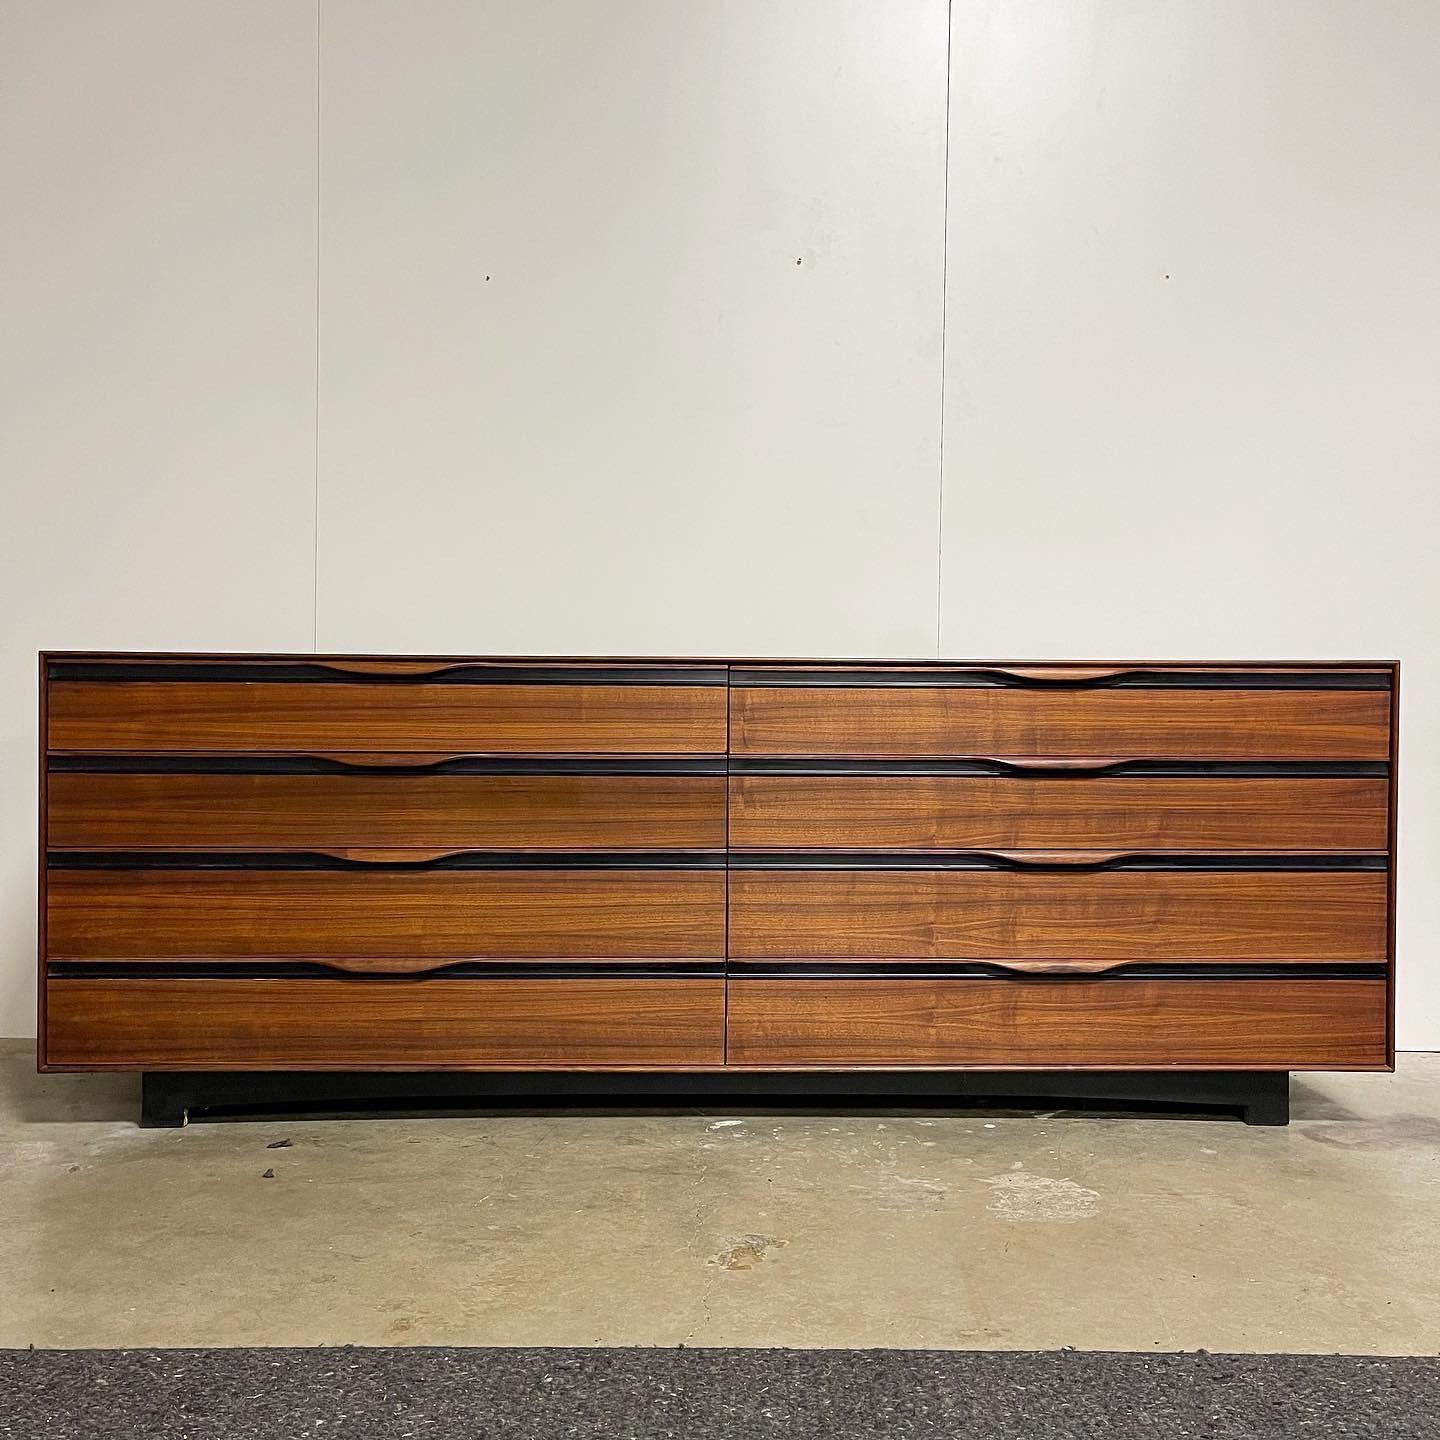 Discounted shipping!
This Glenn of California lowboy might be the sweetest piece of Glenn I’ve come across! John Kapel designer. 1950’s. Very well made heavy walnut piece. 8 drawers total that all slide with ease. Tongue style drawer pulls all in